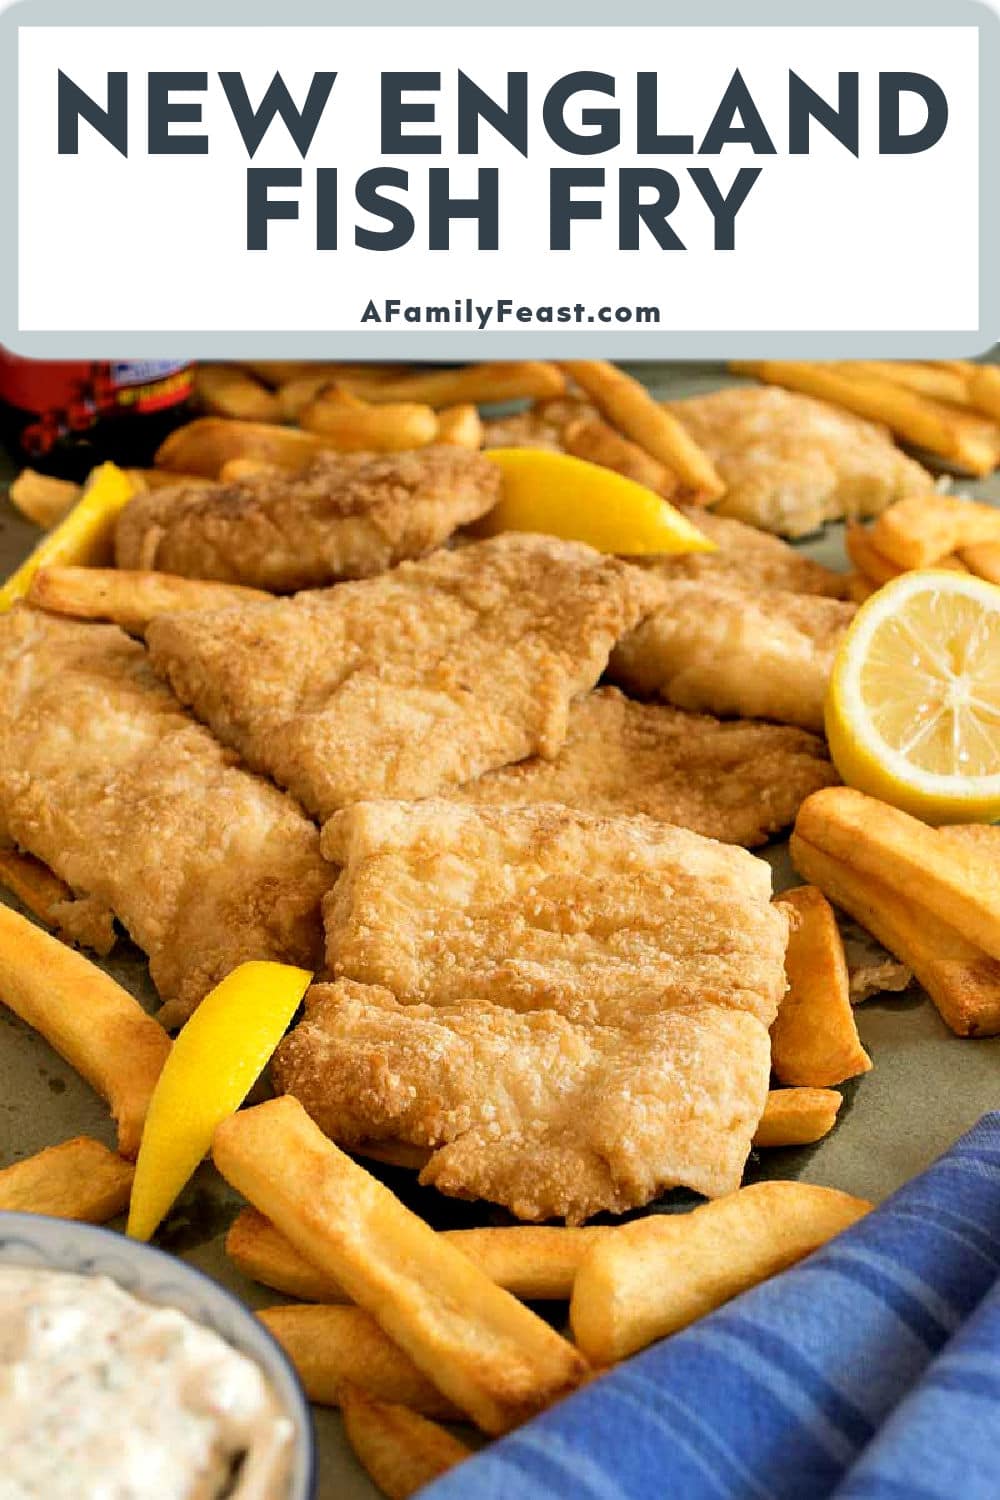 New England Fish Fry - A Family Feast